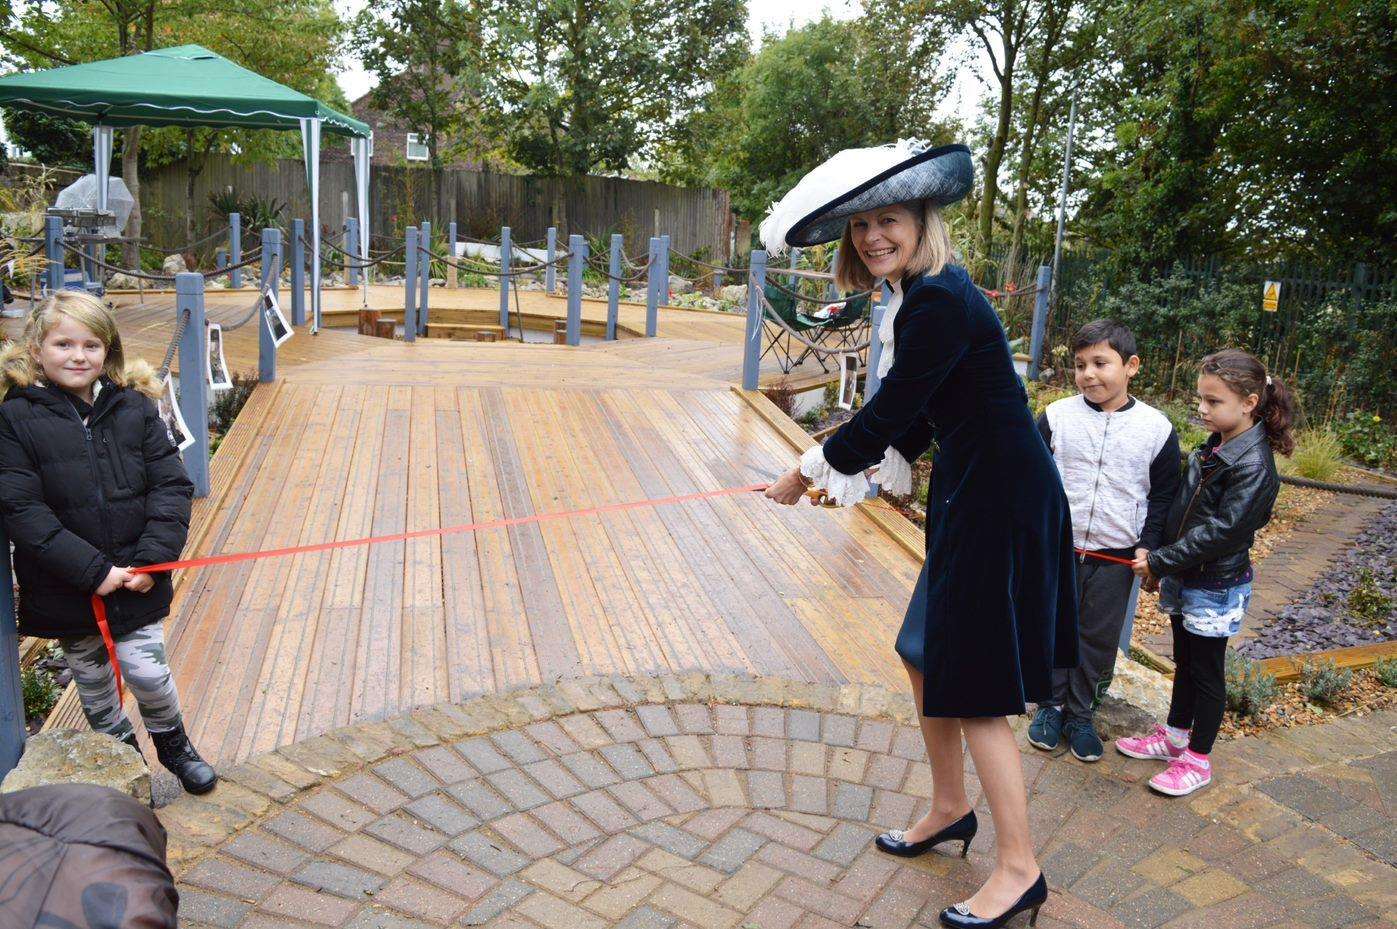 The High Sheriff of Kent, Jane Ashton cutting the ribbon at the opening of the new garden